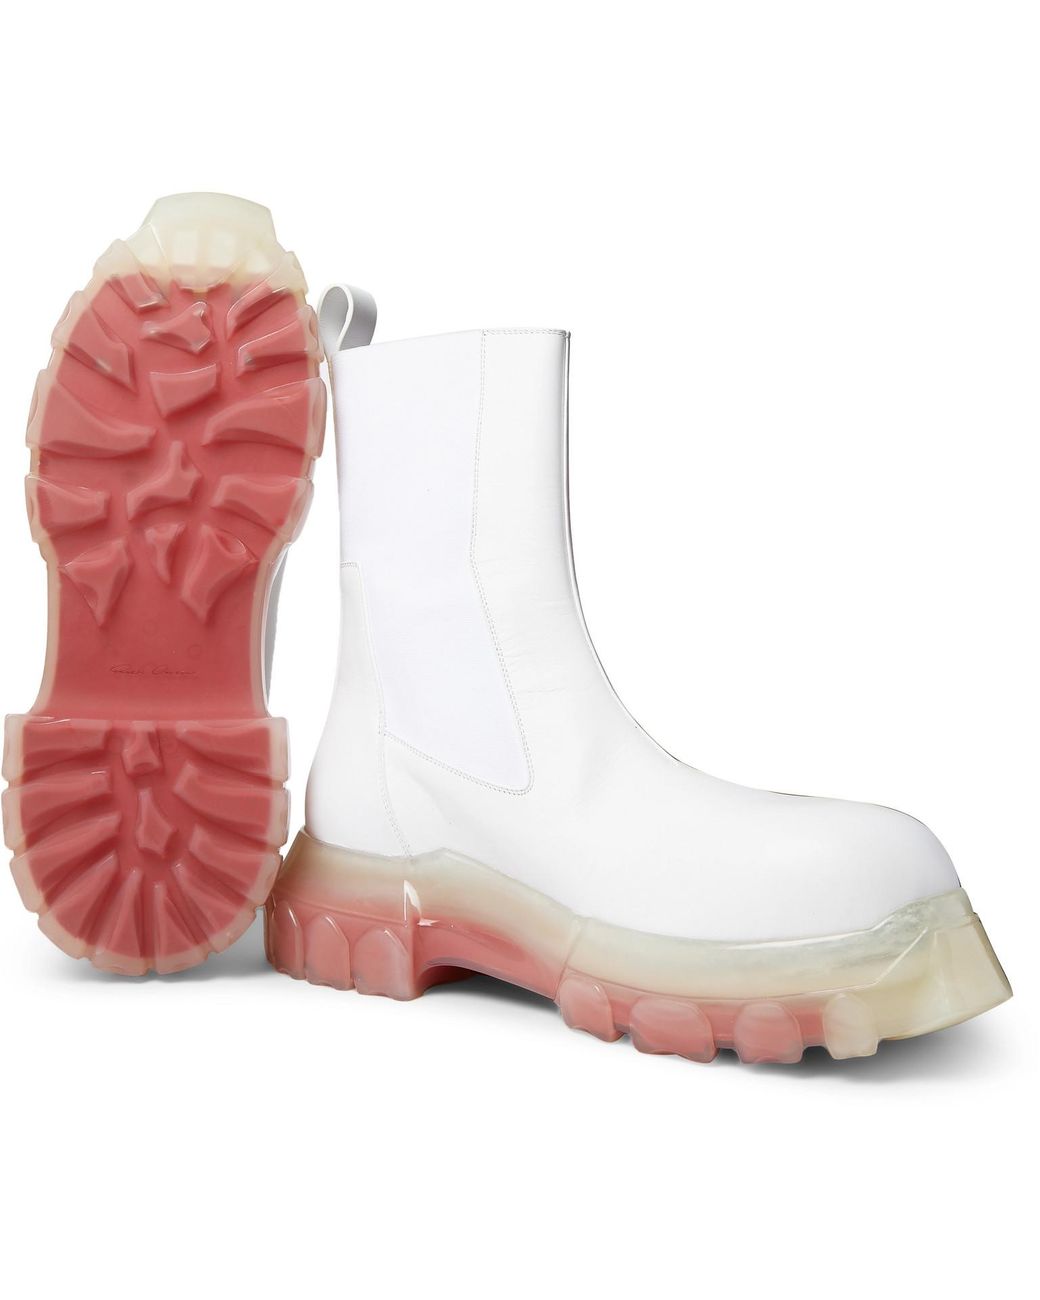 Rick Owens Mega Bozo Tractor Beetle Leather Boots in White for 